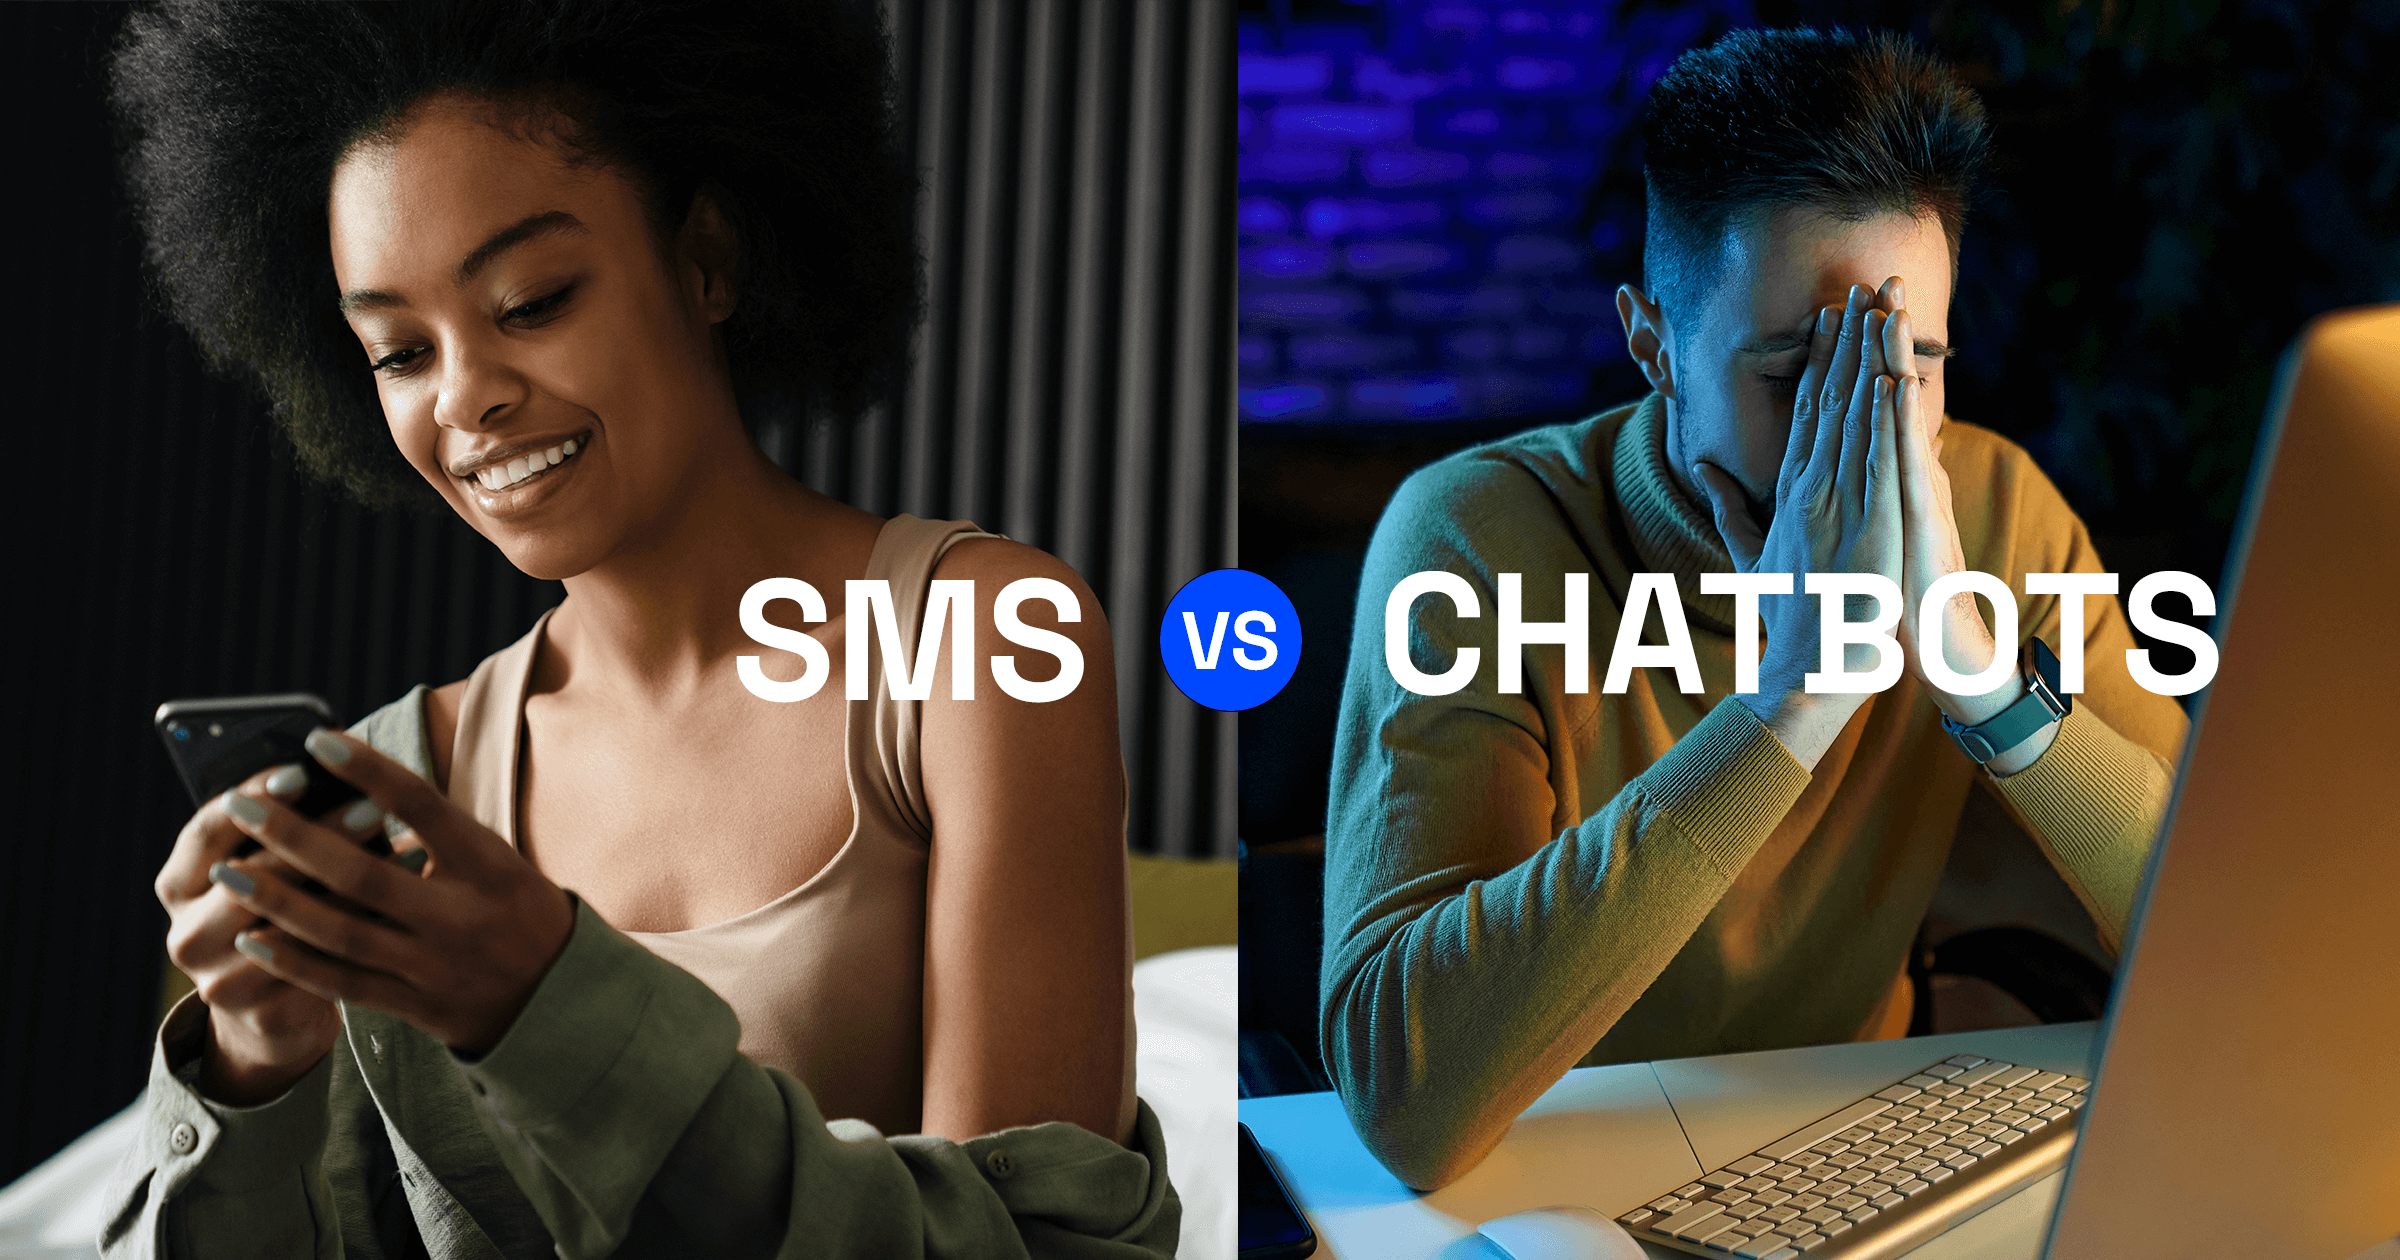 SMS VS Chatbots: 17 stats that prove texting is better than a chatbot Featured Image